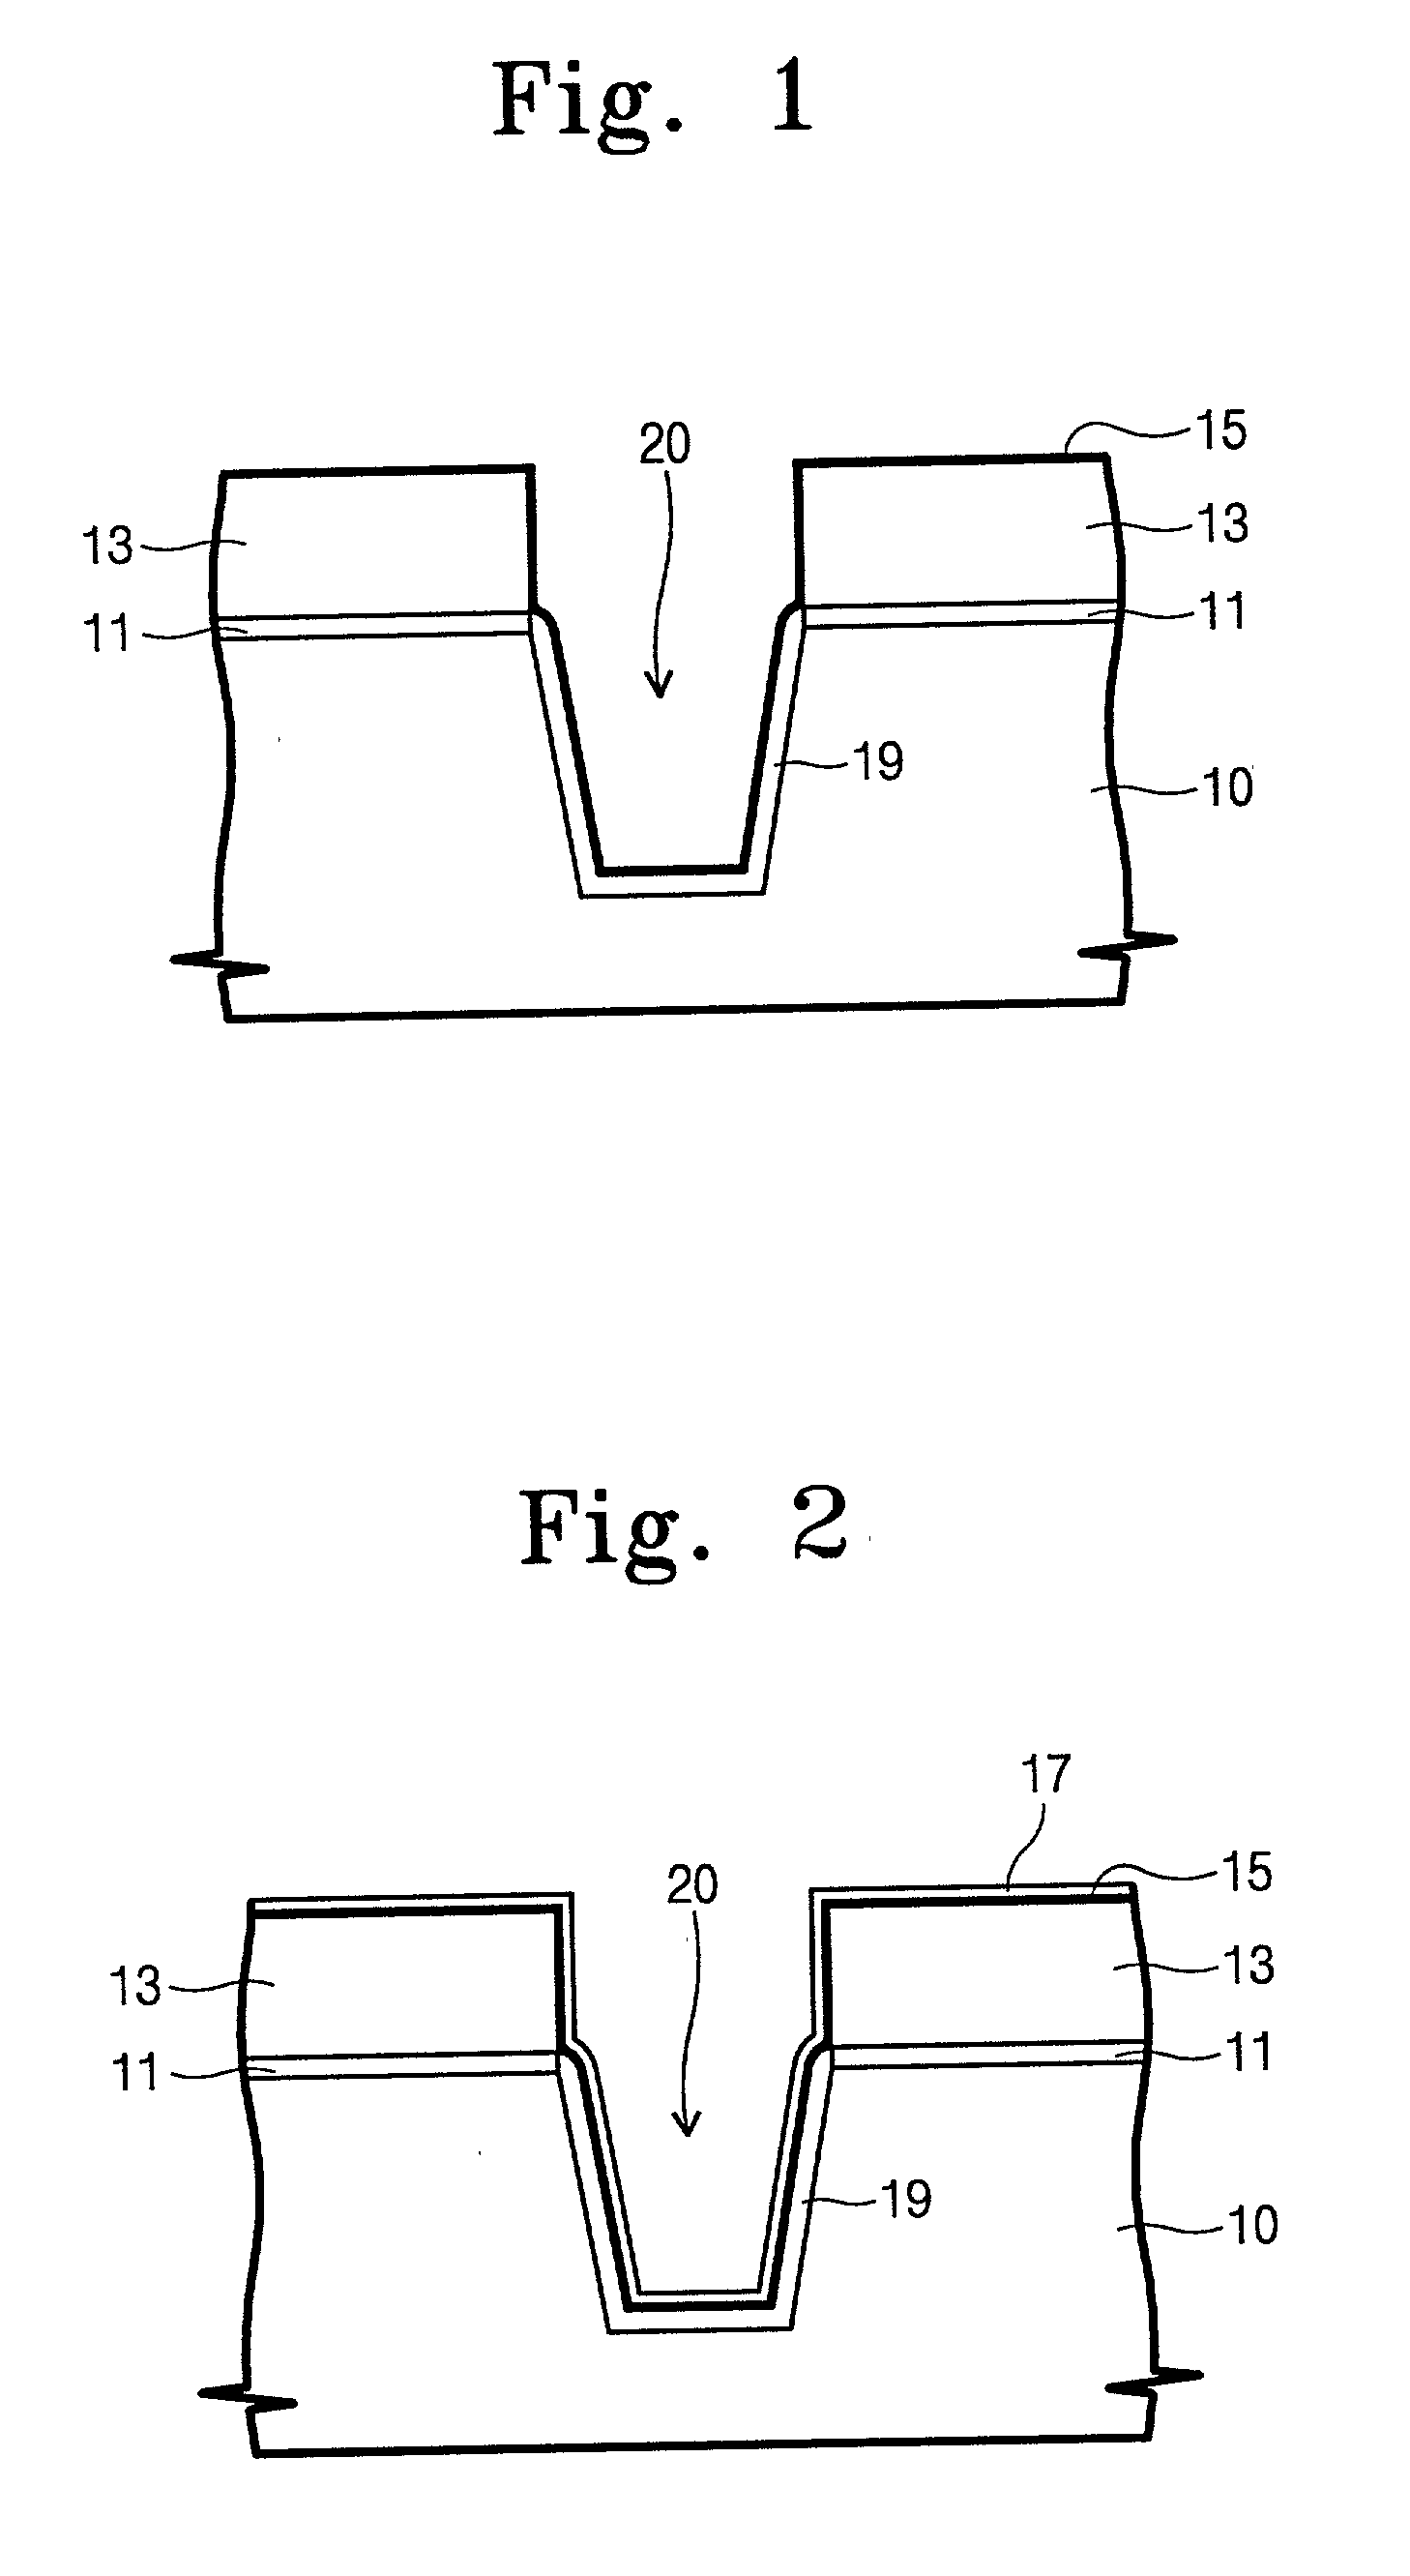 Semiconductor device having trench isolation layer and a method of forming the same